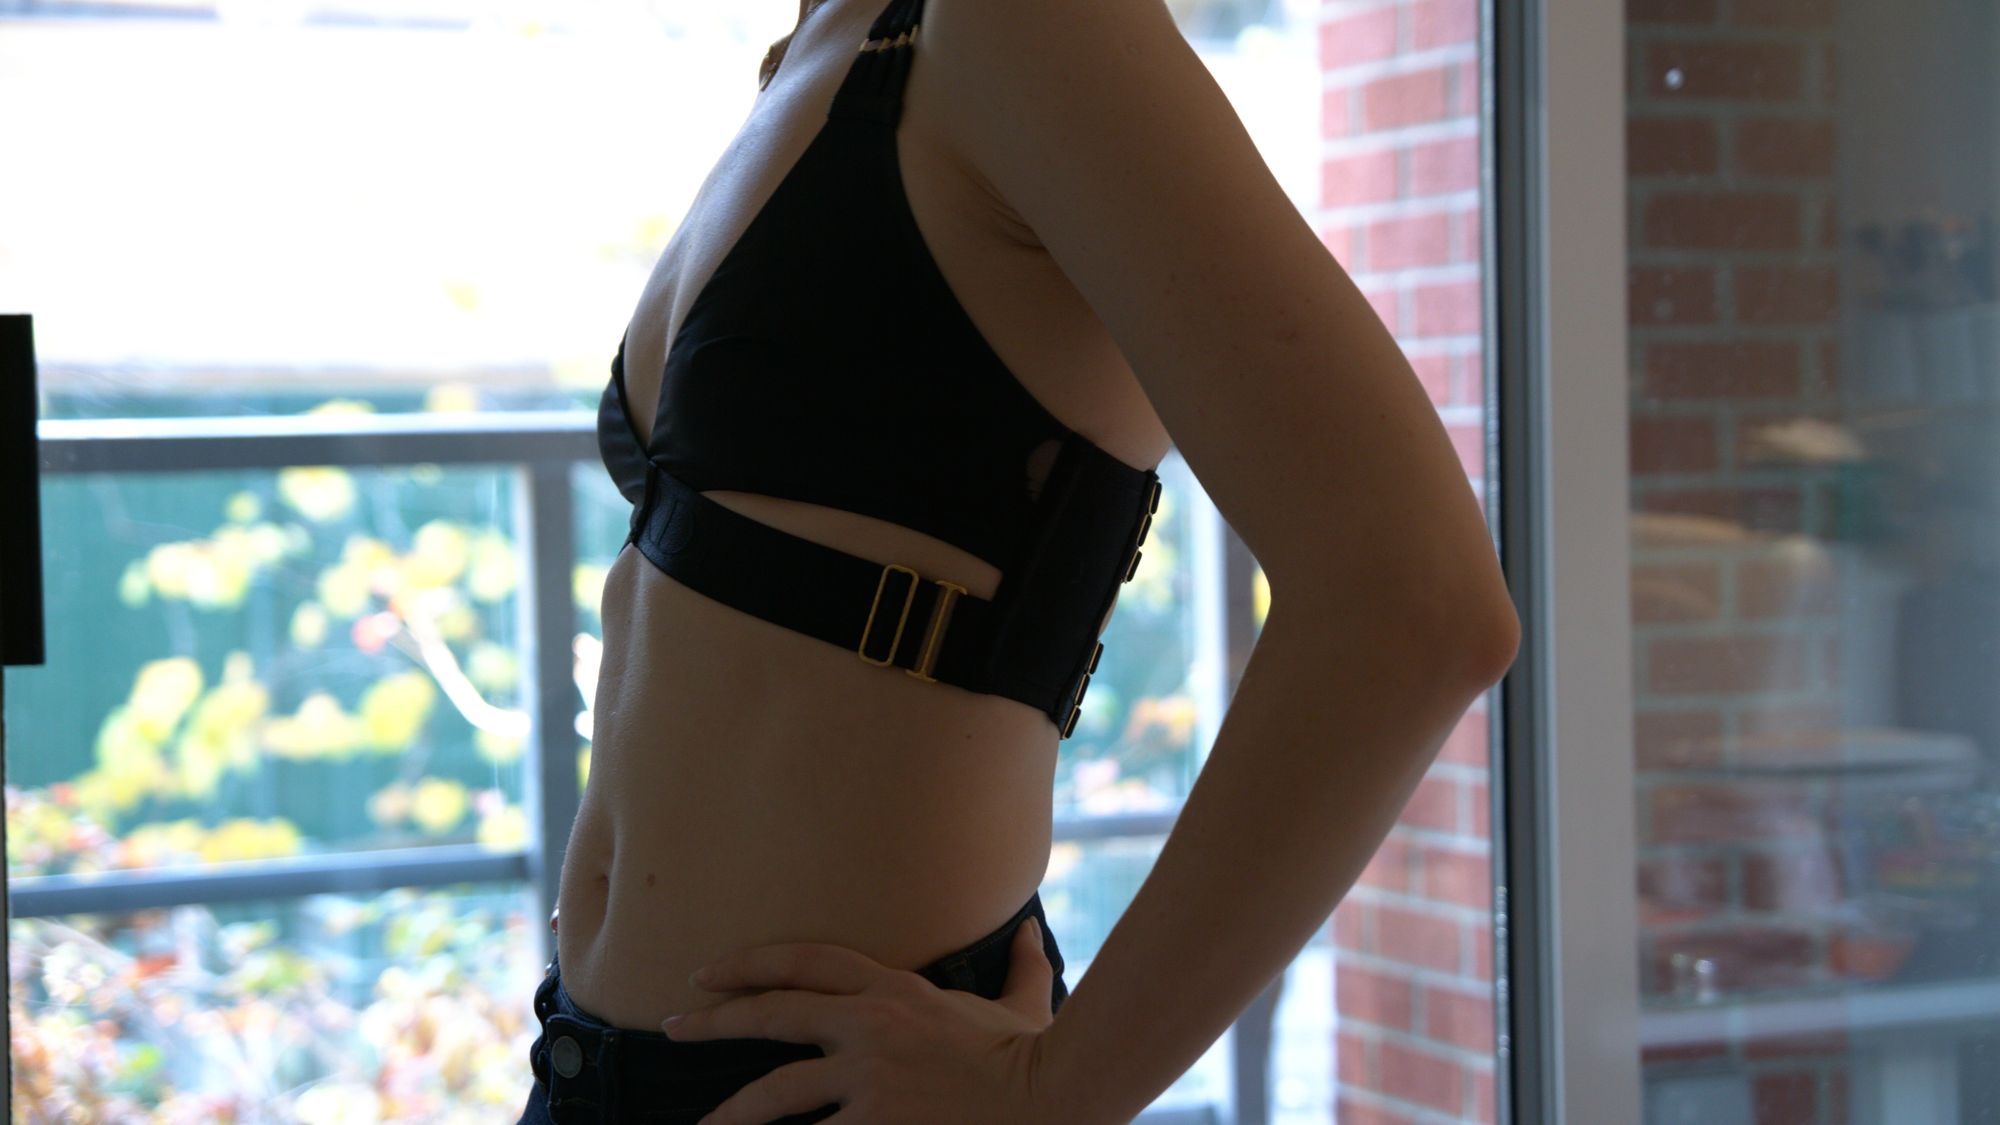 Everyday style. Review of Allegra bra by Bordelle